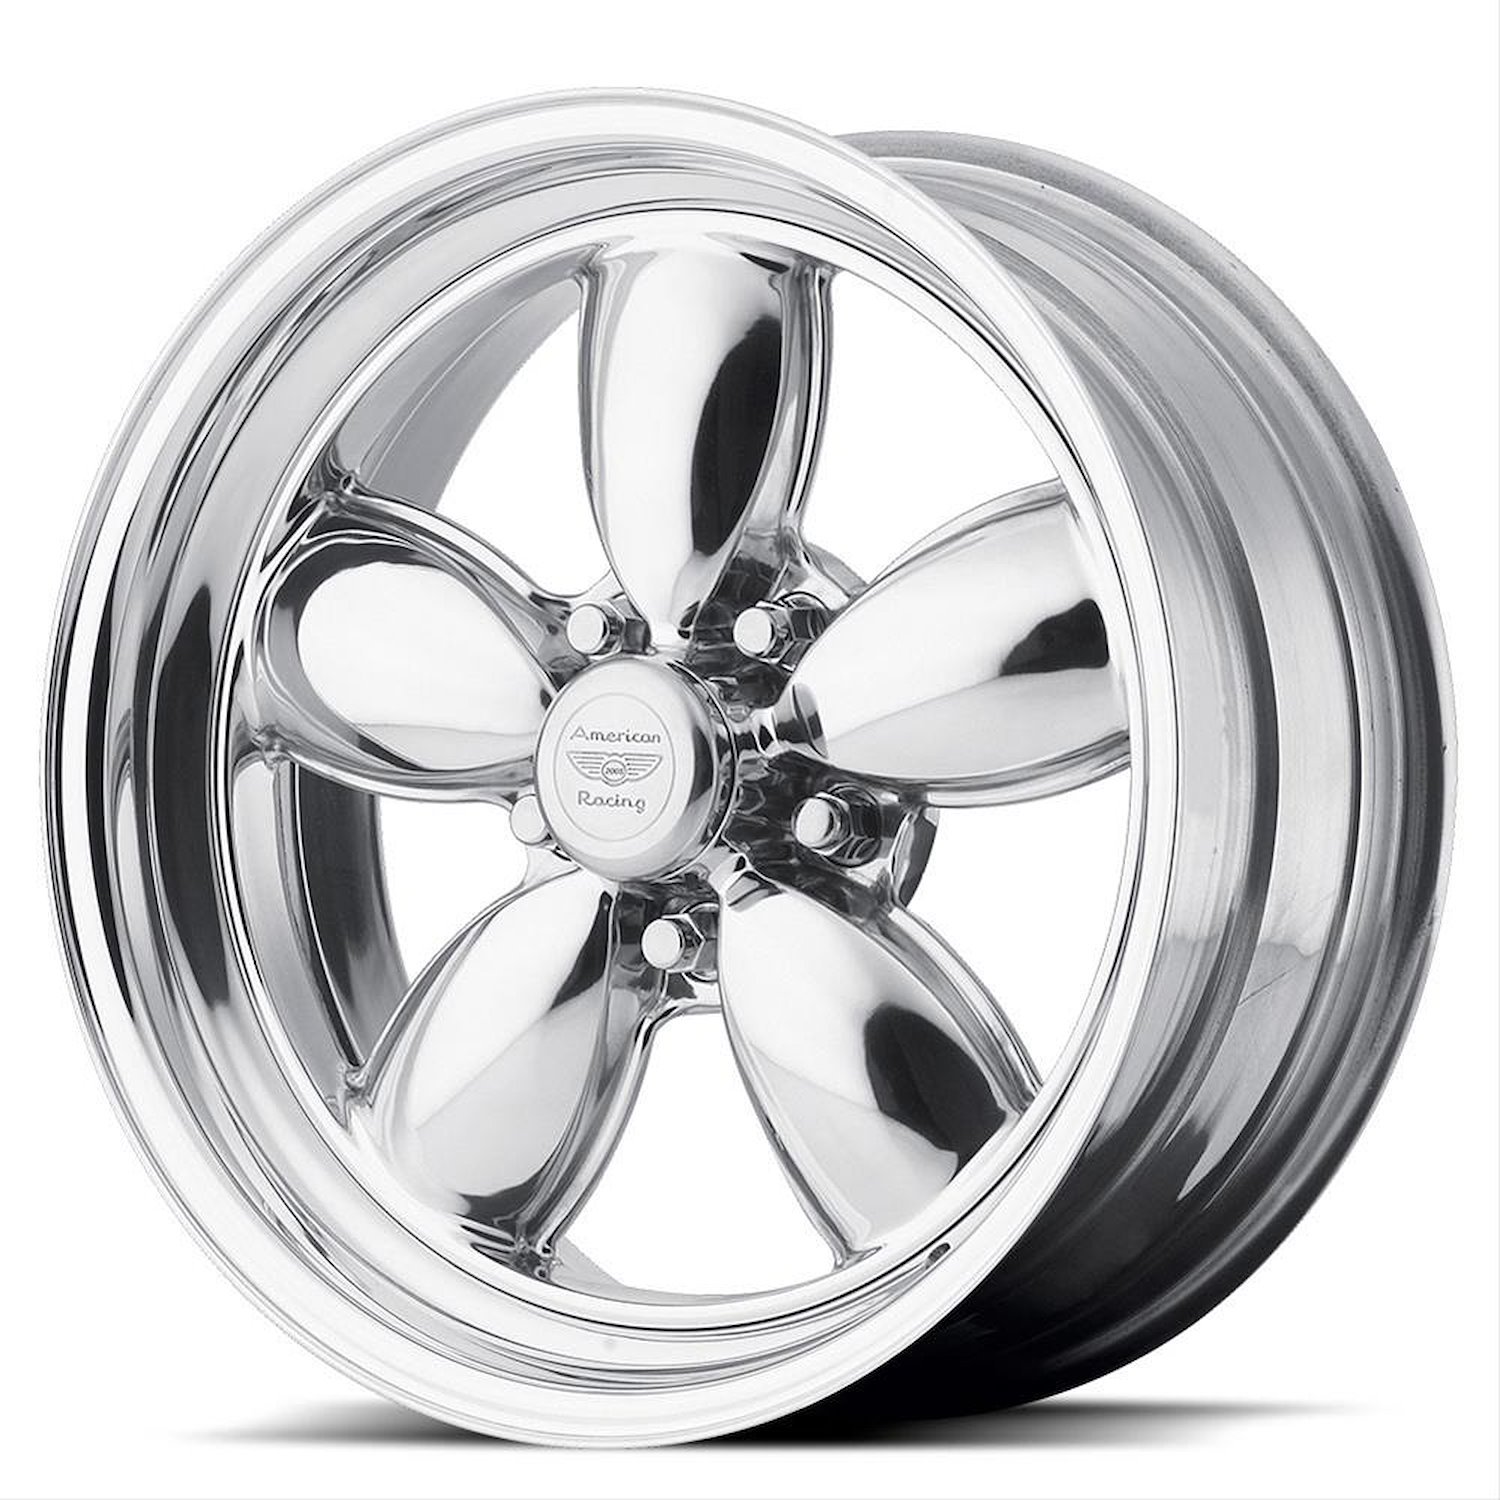 AMERICAN RACING CLASSIC 200S TWO-PIECE POLISHED 17 x 7 5x4.5 -6 3.76